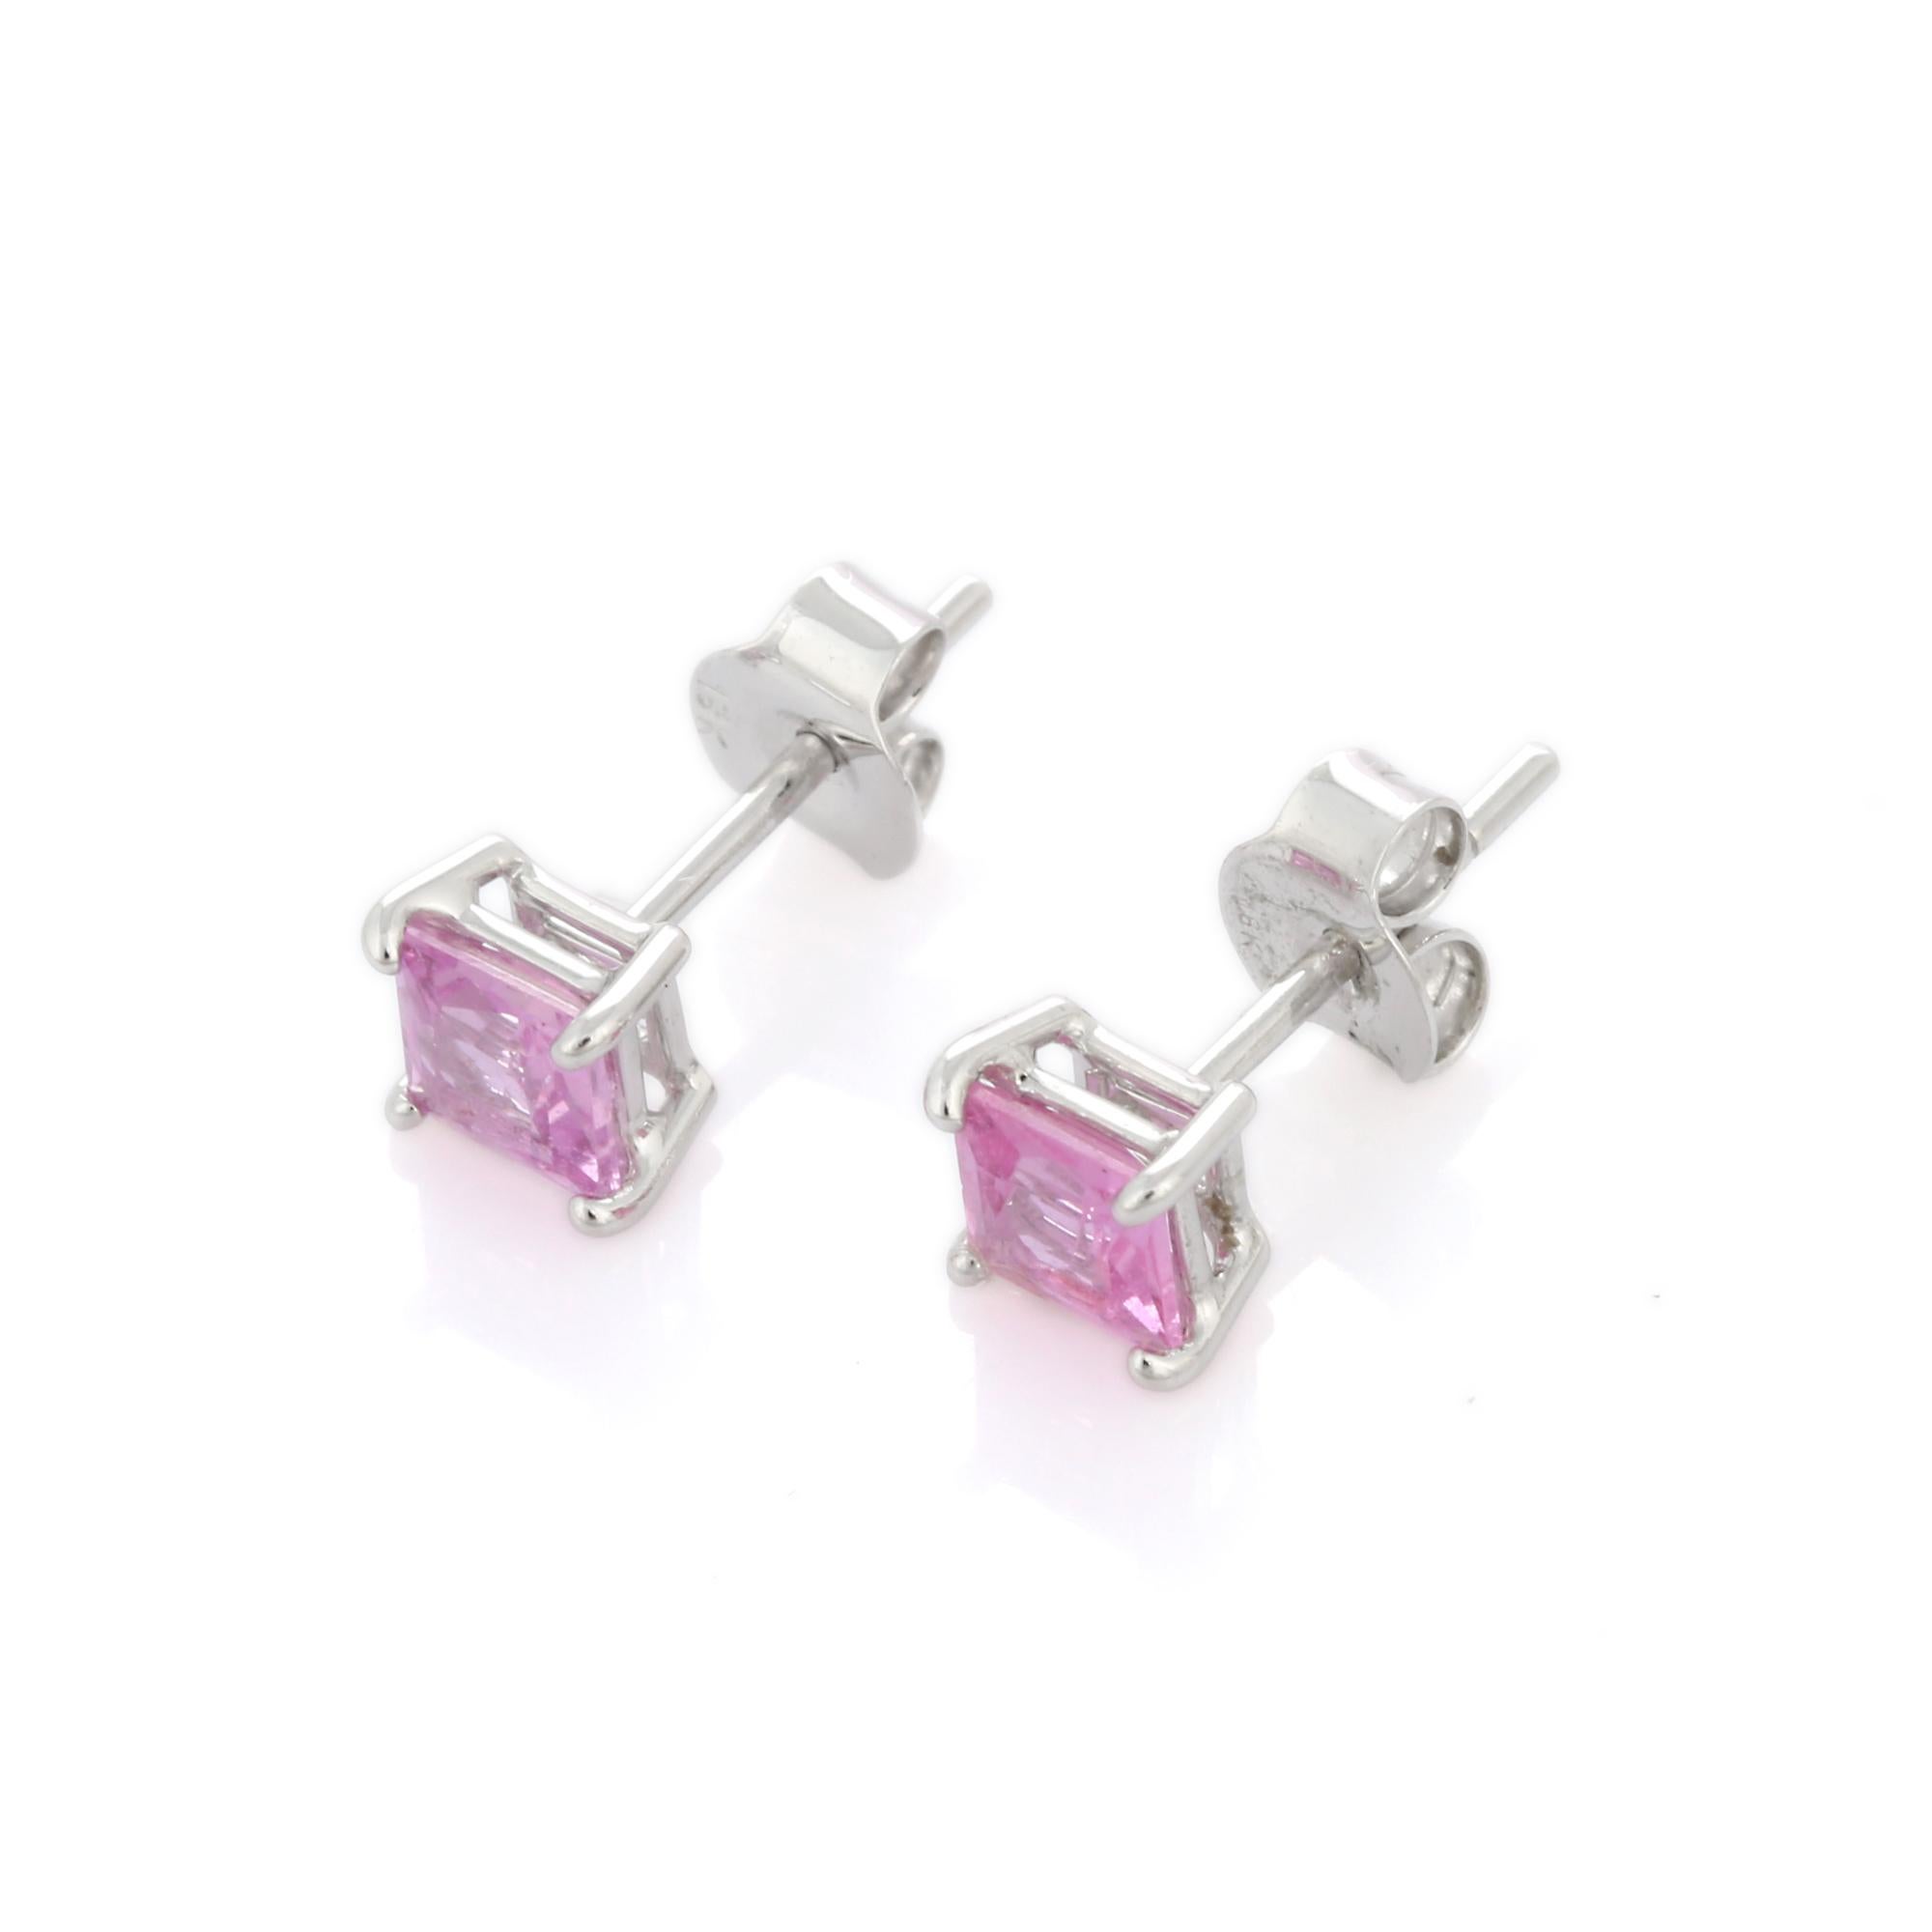 Studs create a subtle beauty while showcasing the colors of the natural precious gemstones and illuminating diamonds making a statement.

Square cut pink sapphire studs in 18K gold. Embrace your look with these stunning pair of earrings suitable for